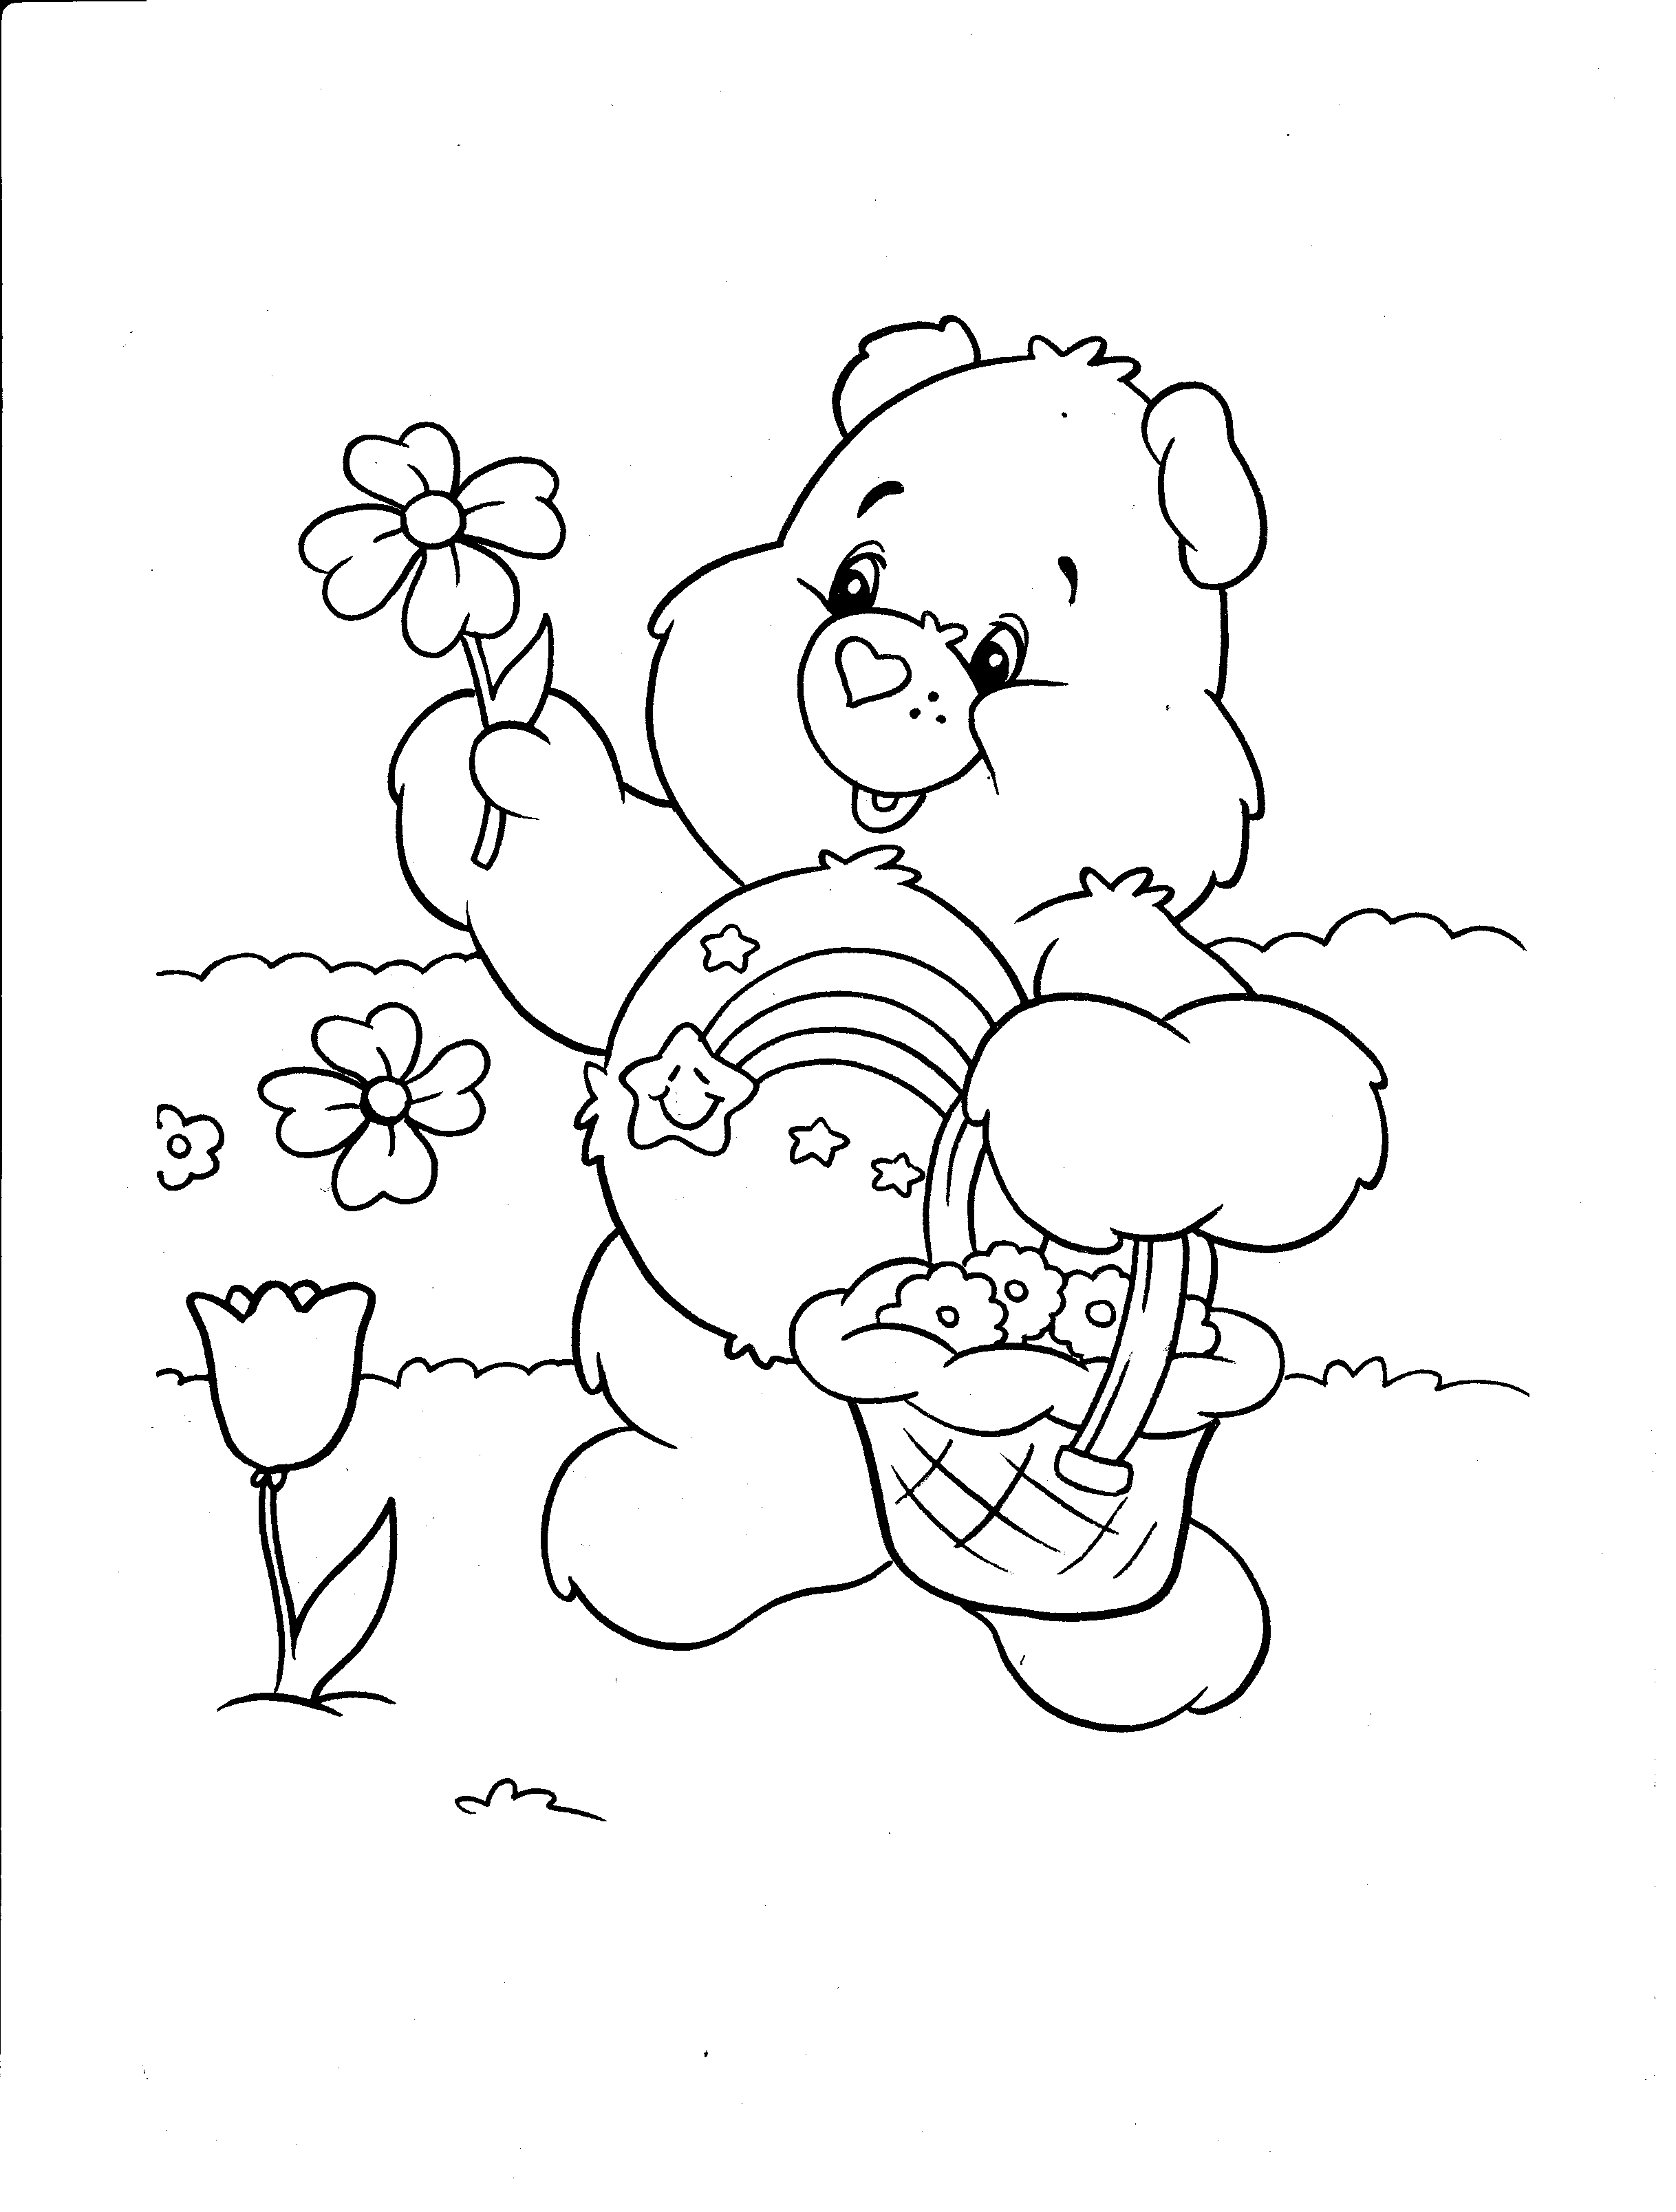 printable-bear-coloring-pages